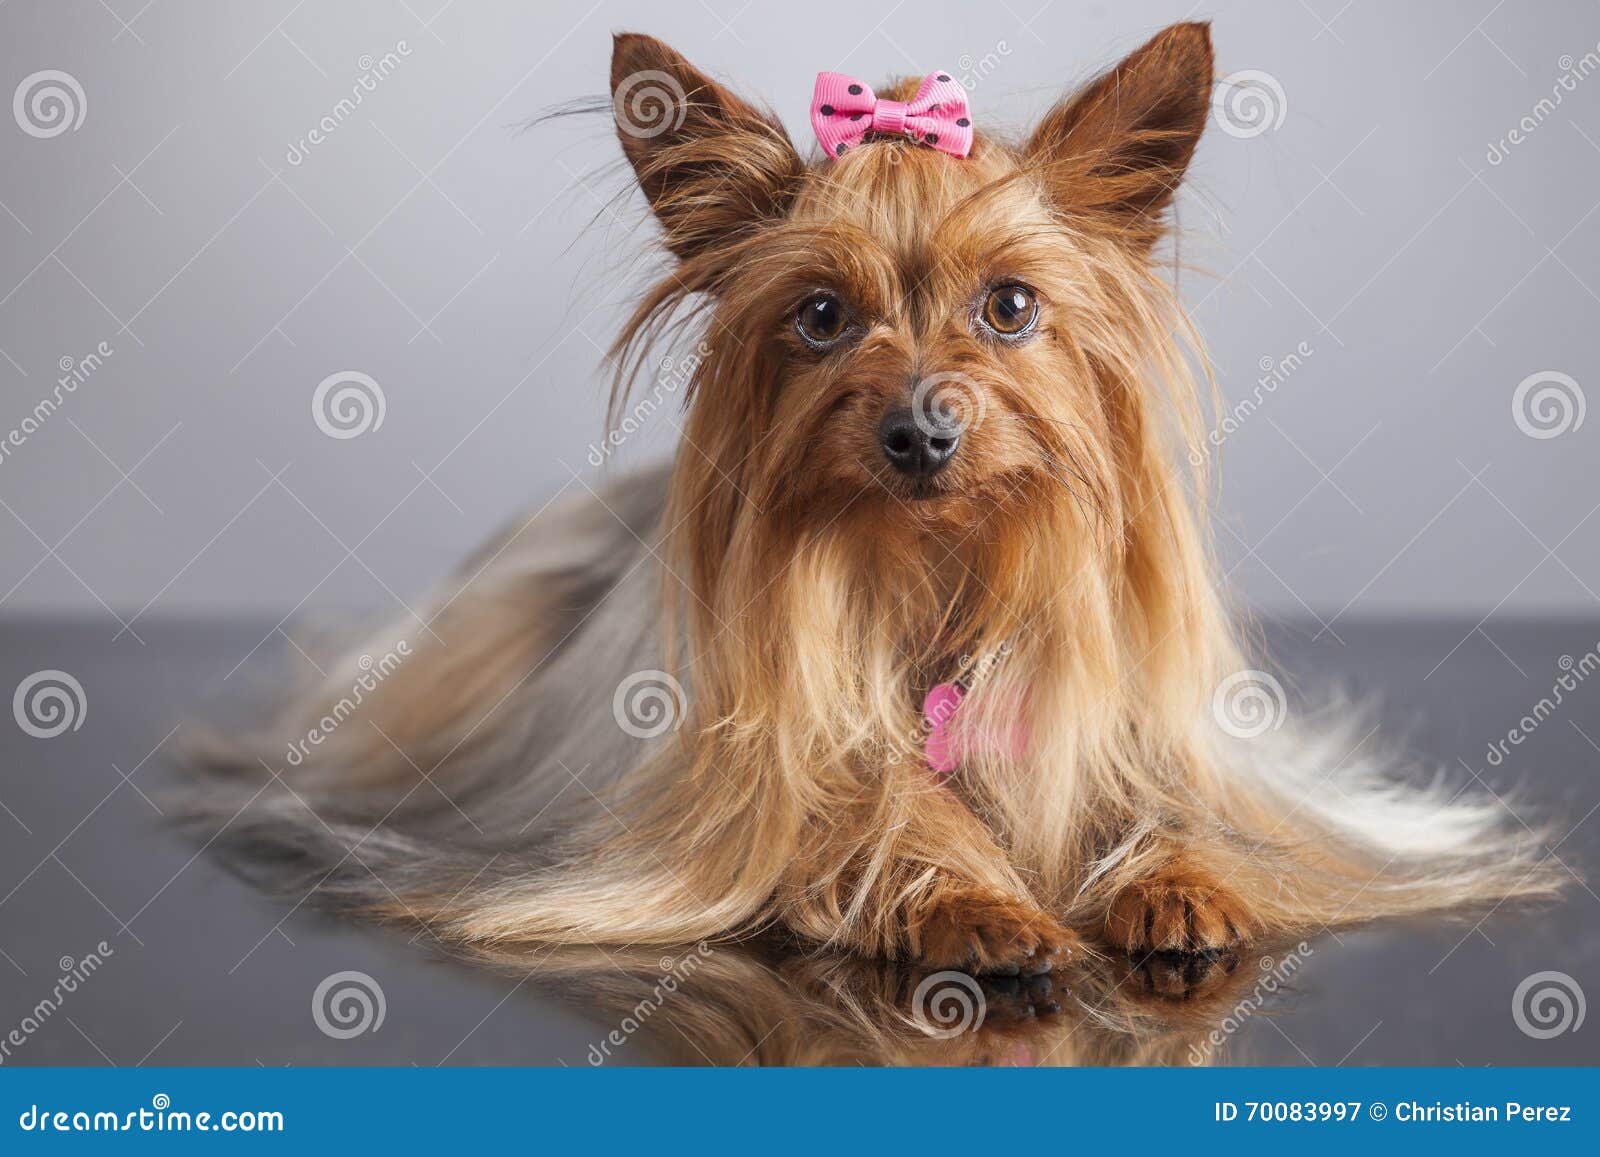 yorkshire terrier portrait with relfection